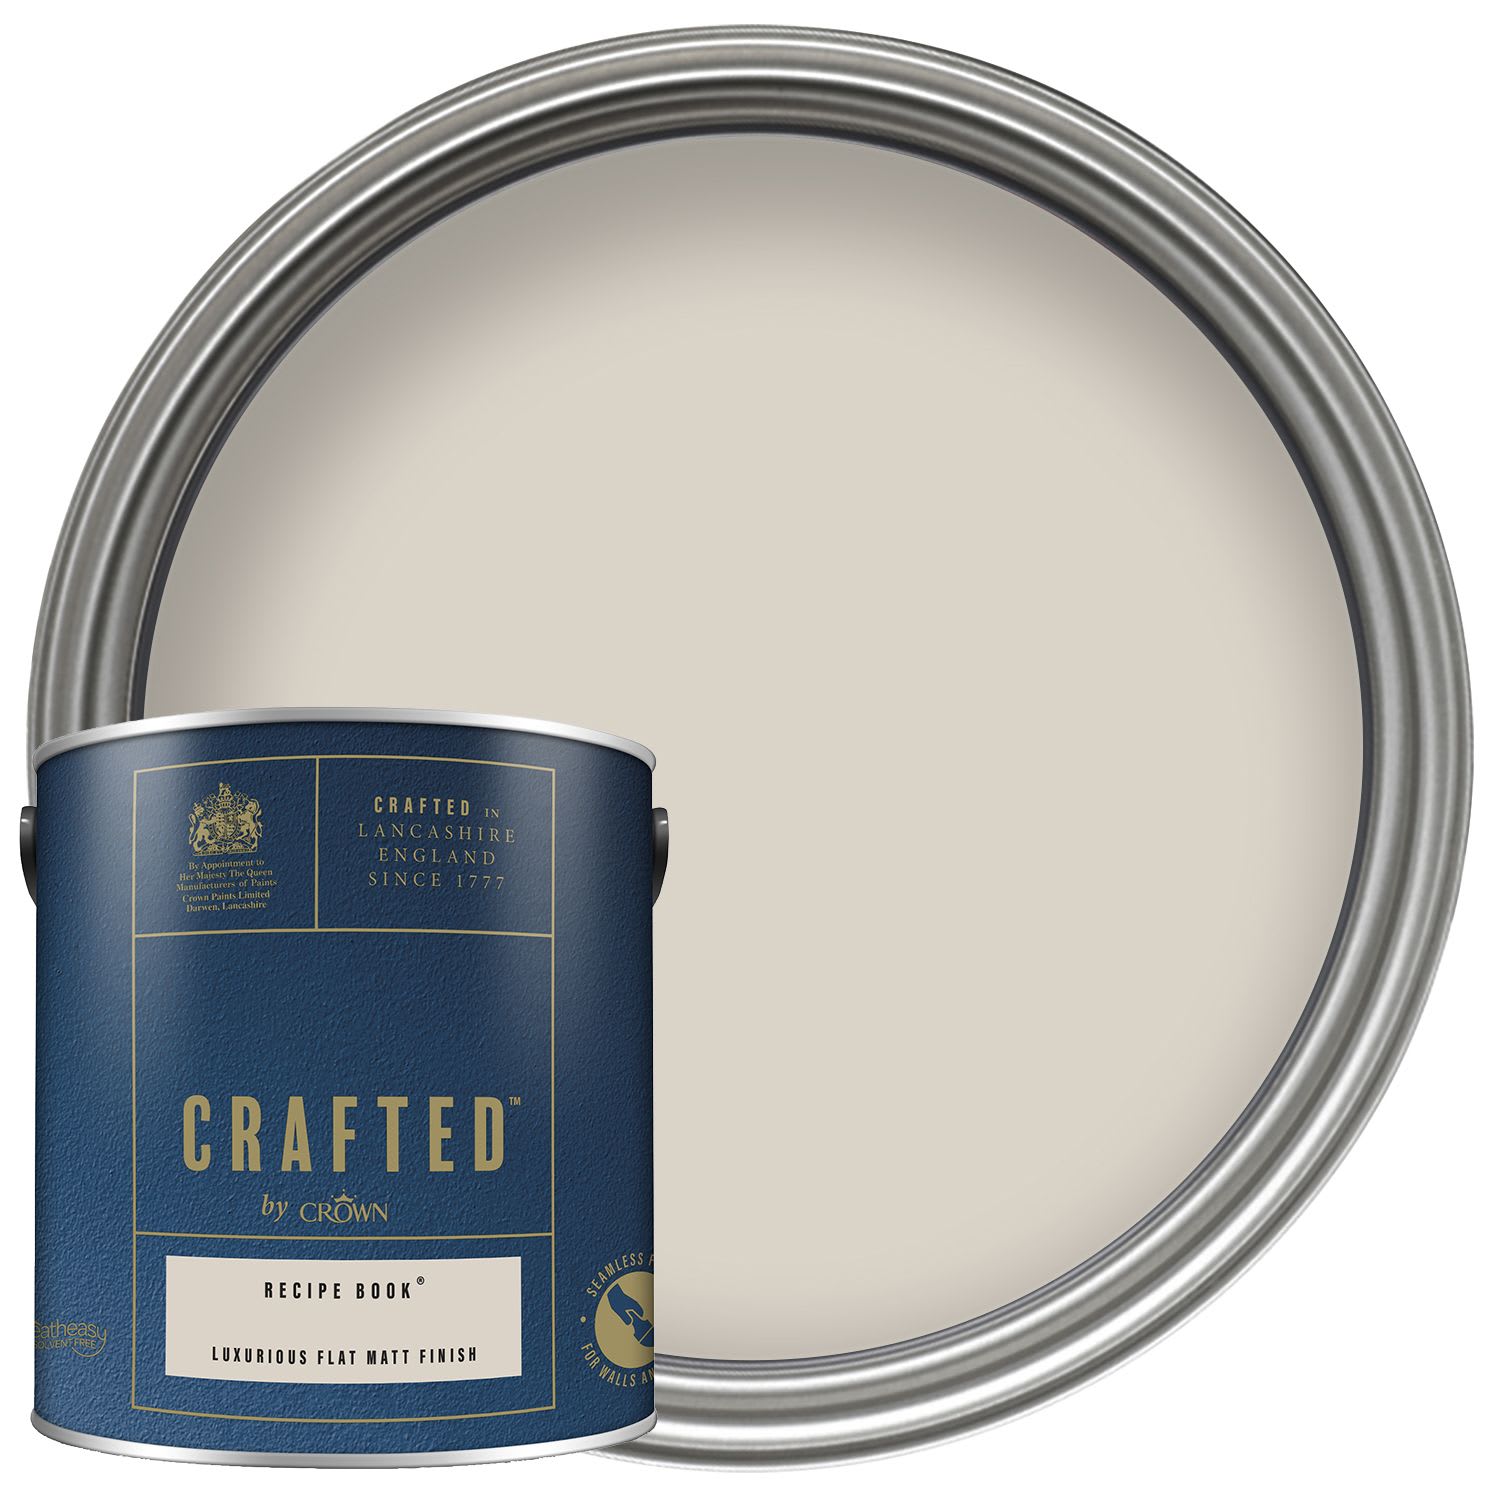 CRAFTED™ by Crown Flat Matt Emulsion Interior Paint